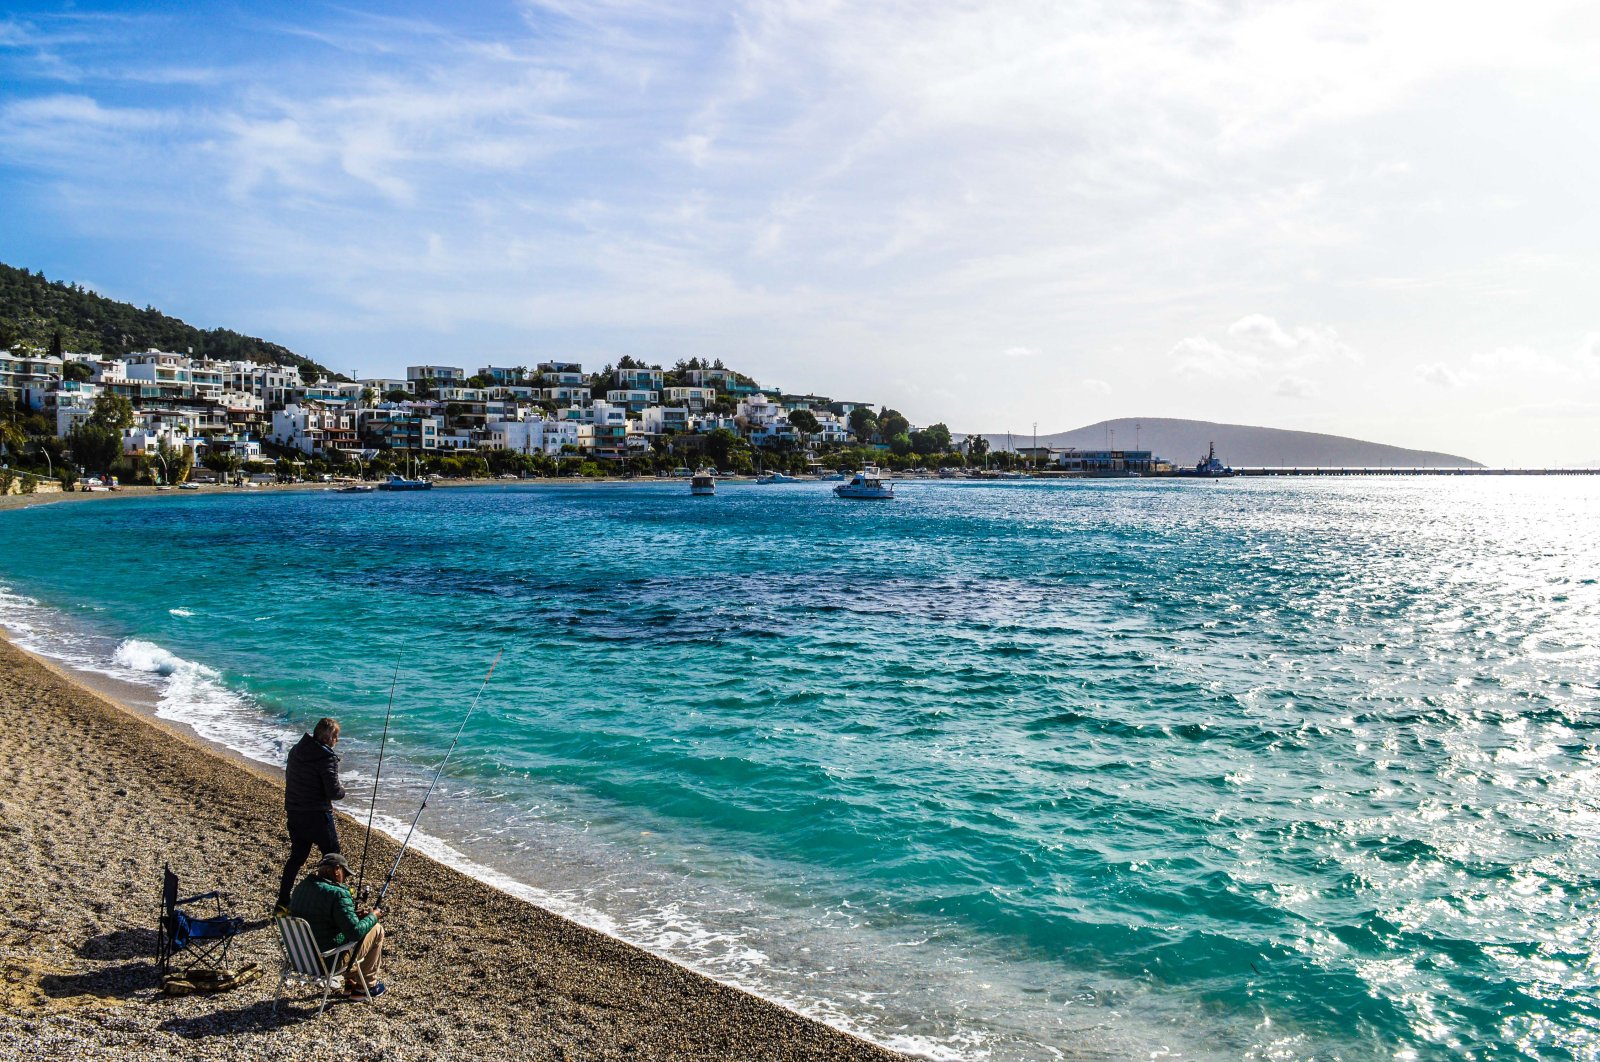 Two fishermen try to catch fish from a beach, in Bodrum, Türkiye, Feb. 11, 2021. (Getty Images Photo)